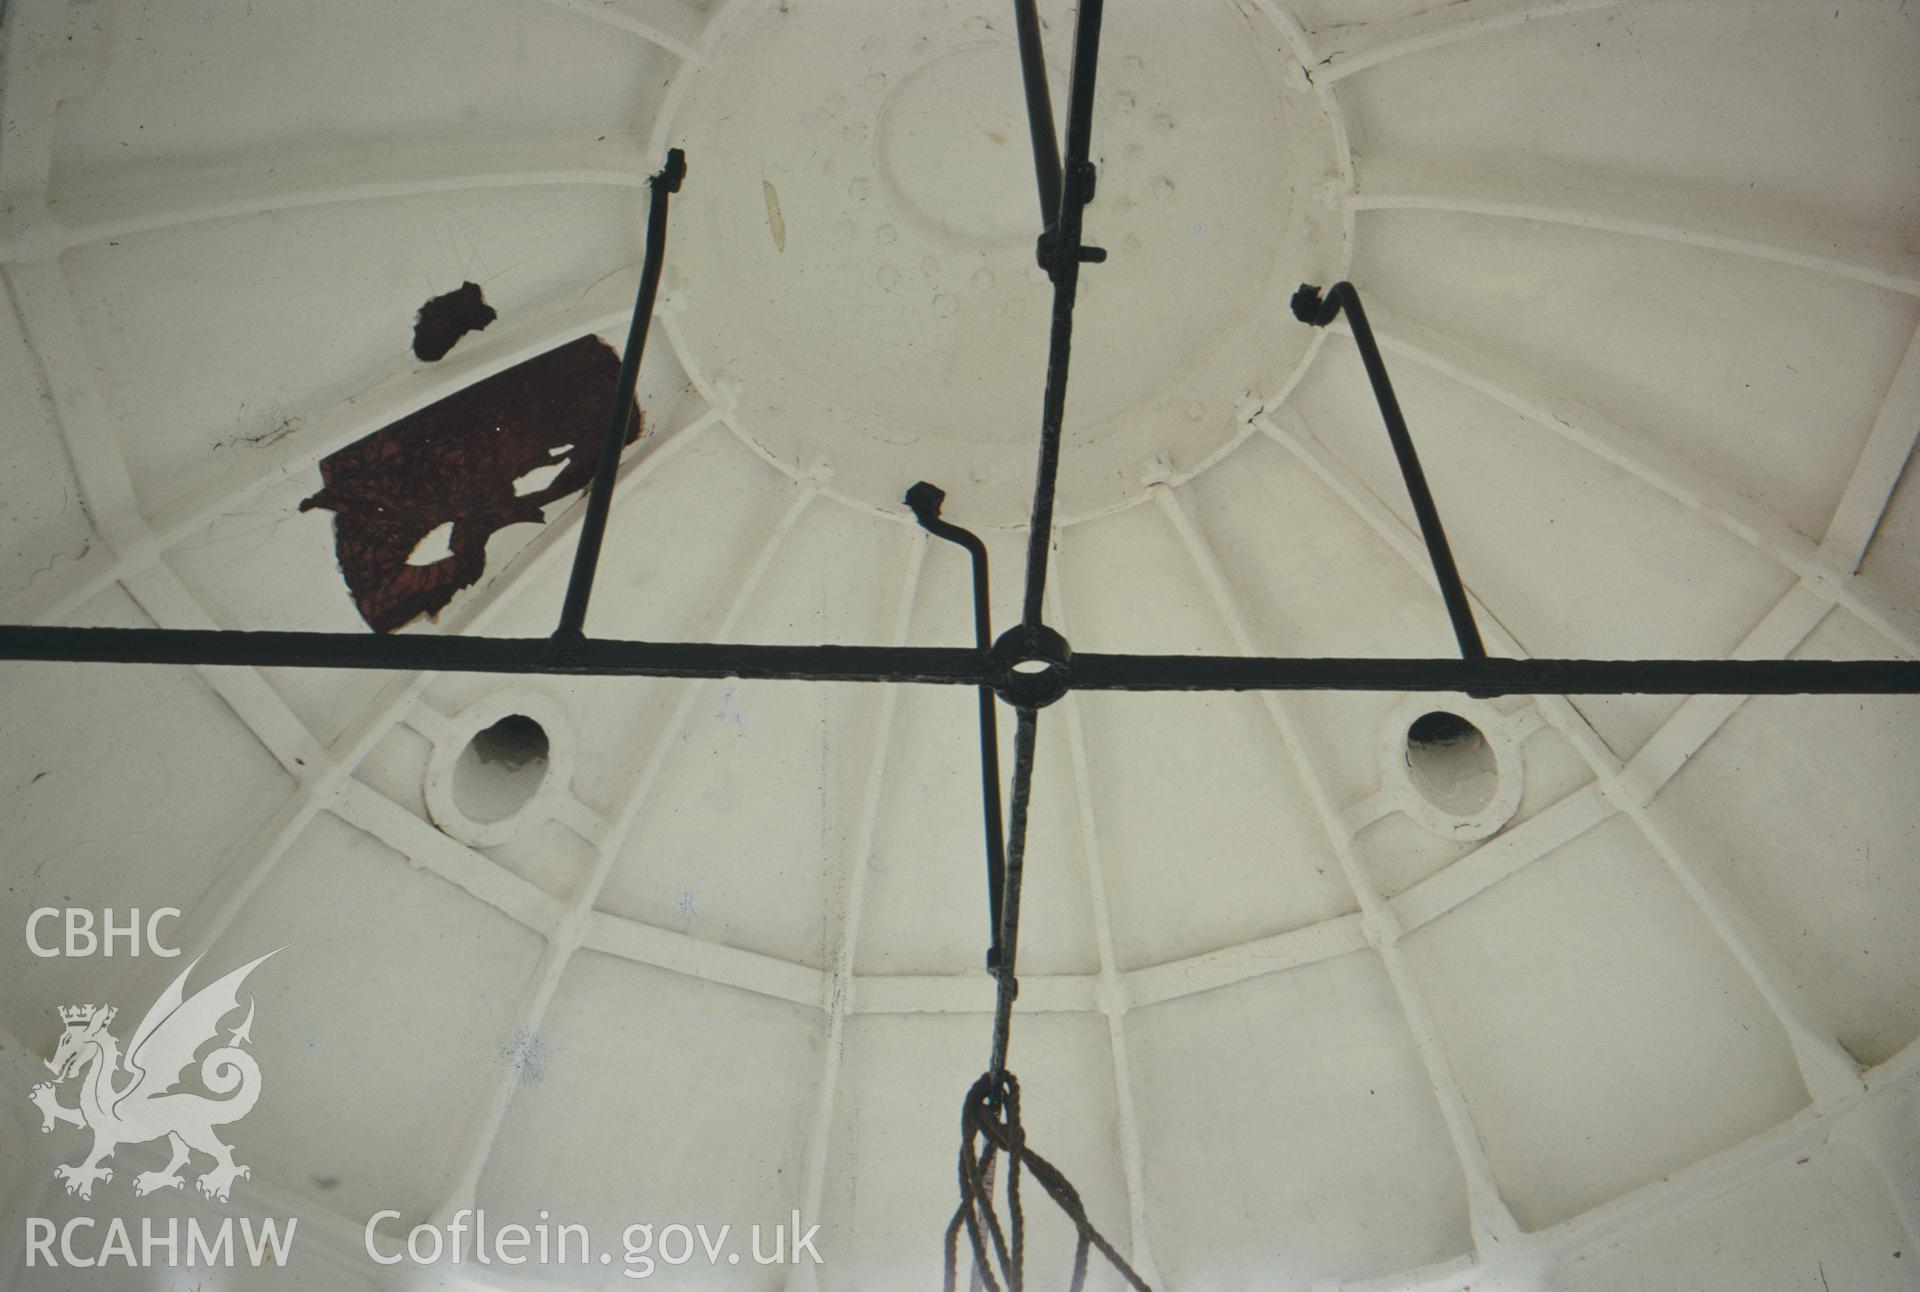 Colour slide of Point of Ayr Lighthouse showing interior view of the top of the lantern.